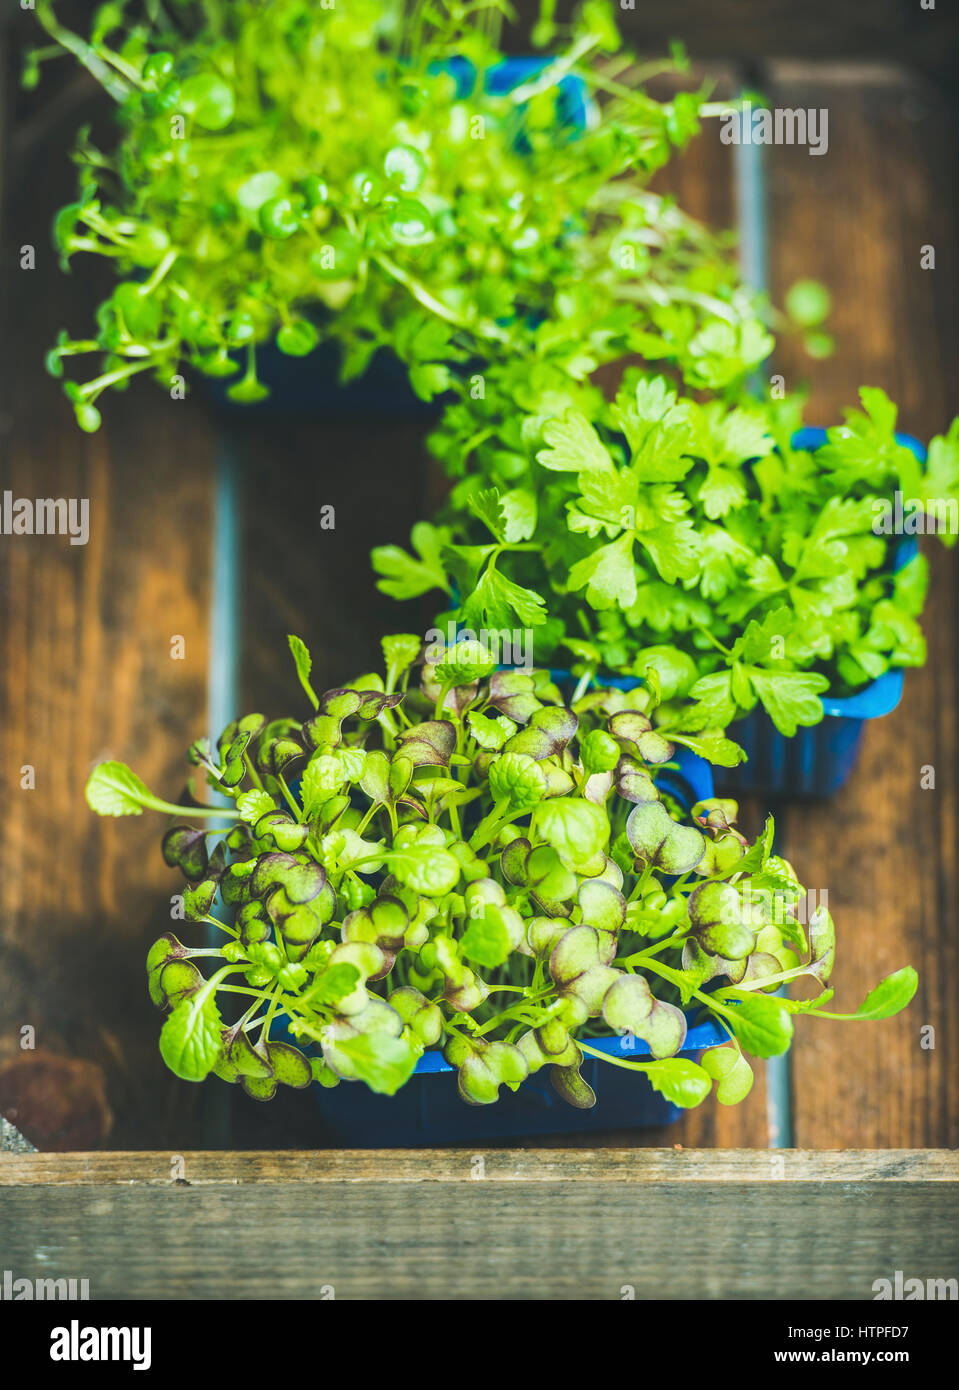 Radish cress, water cress and coriander sprouts in blue plastic pots Stock Photo